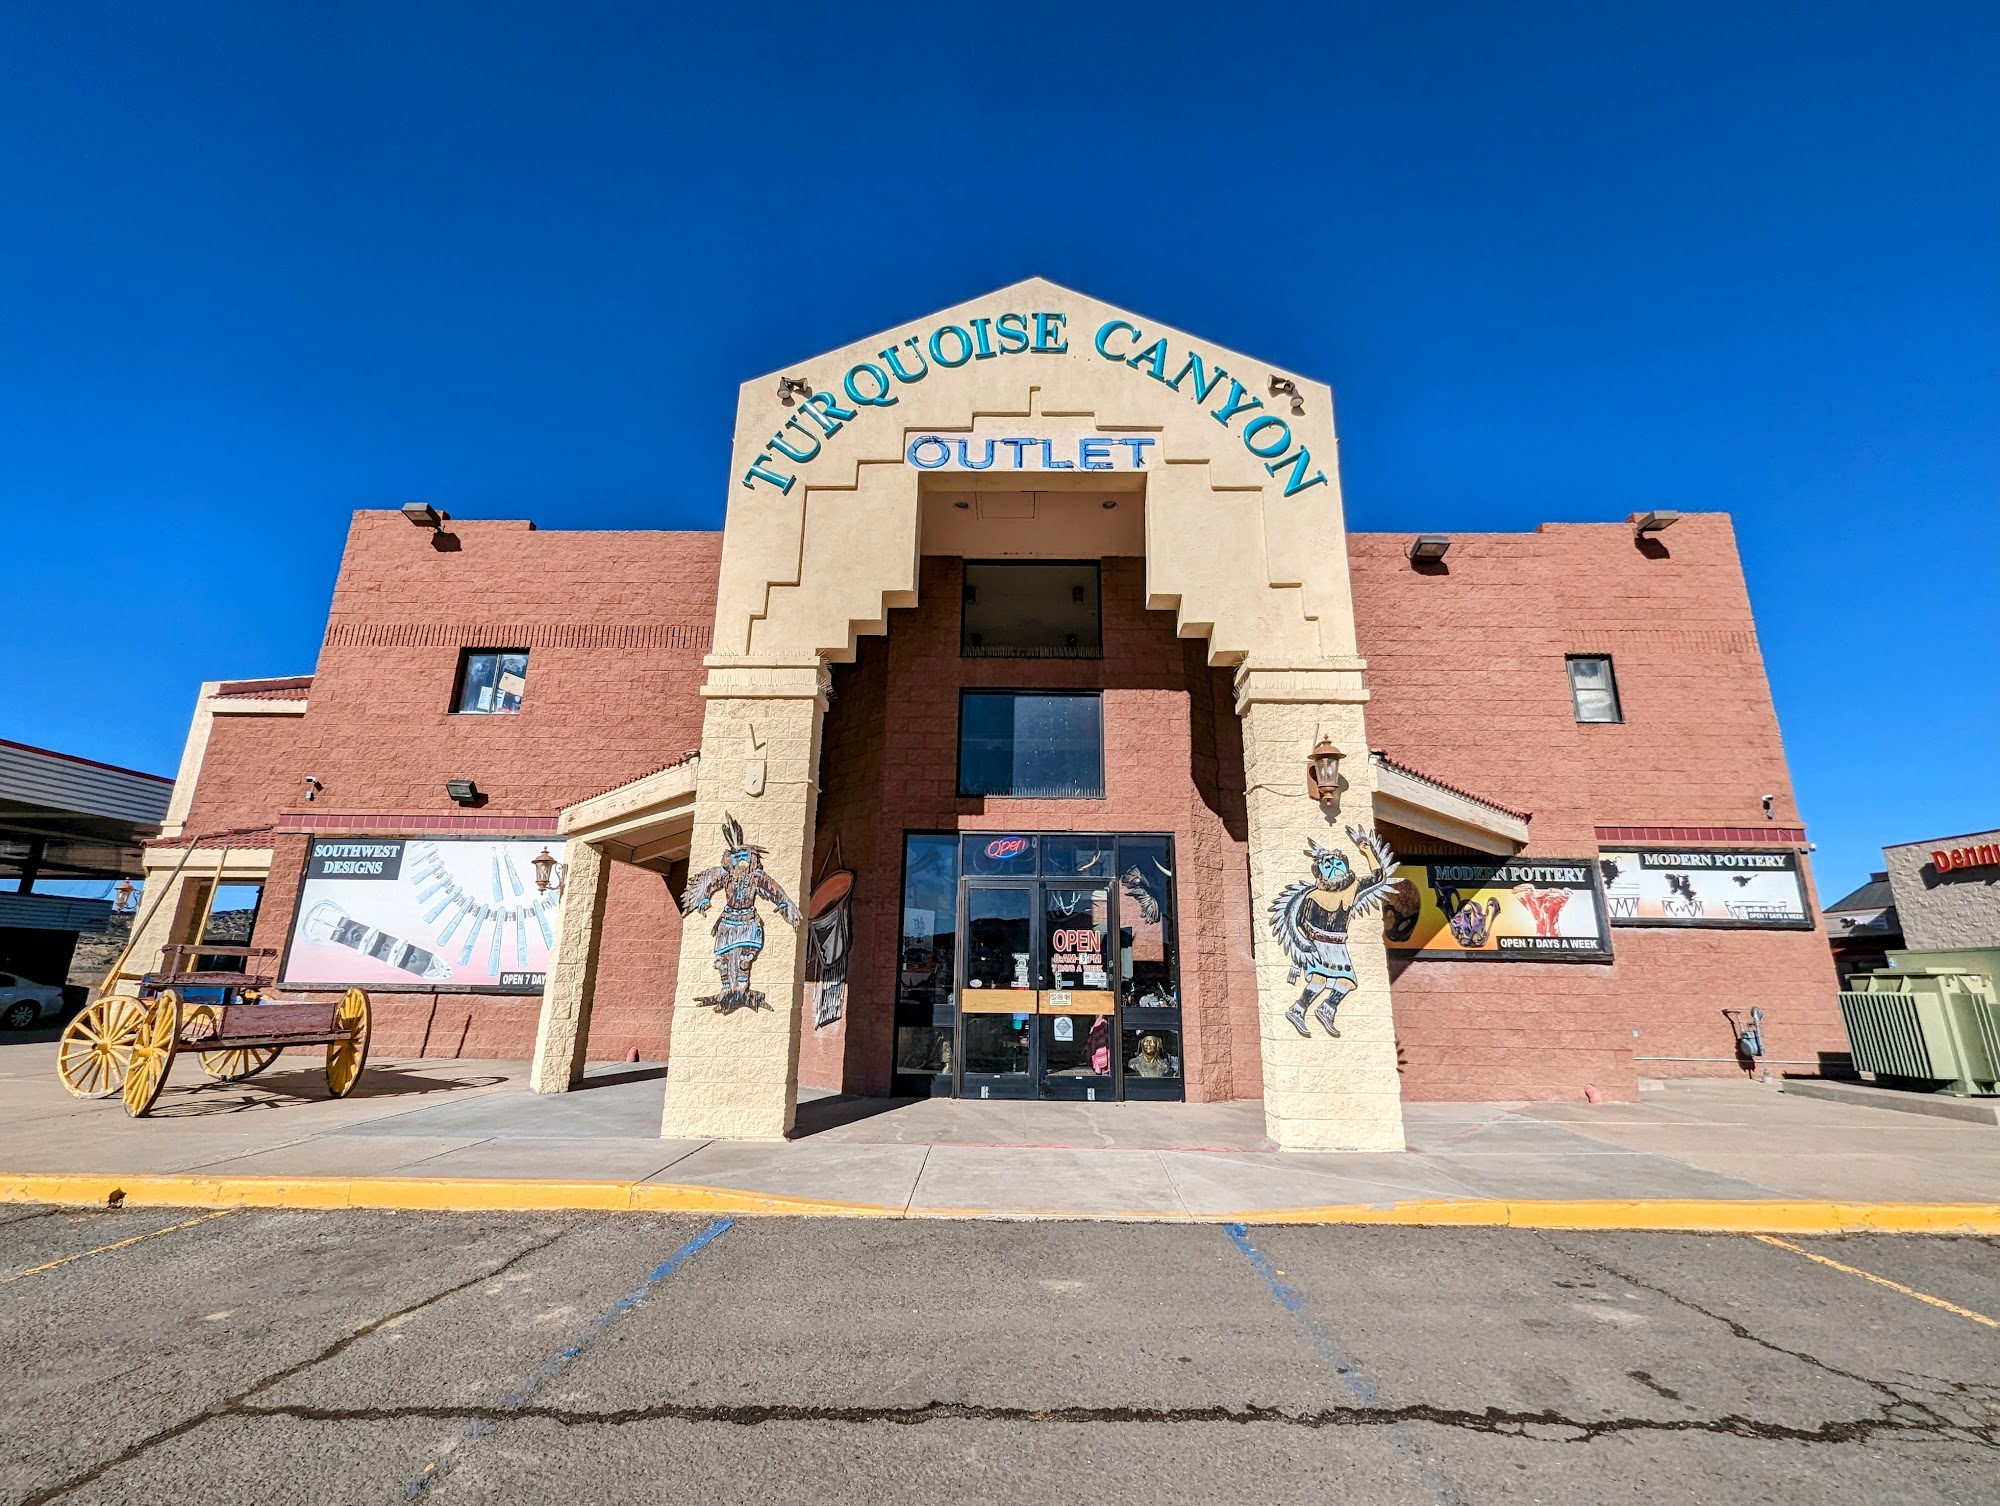 Turquoise Canyon Outlet